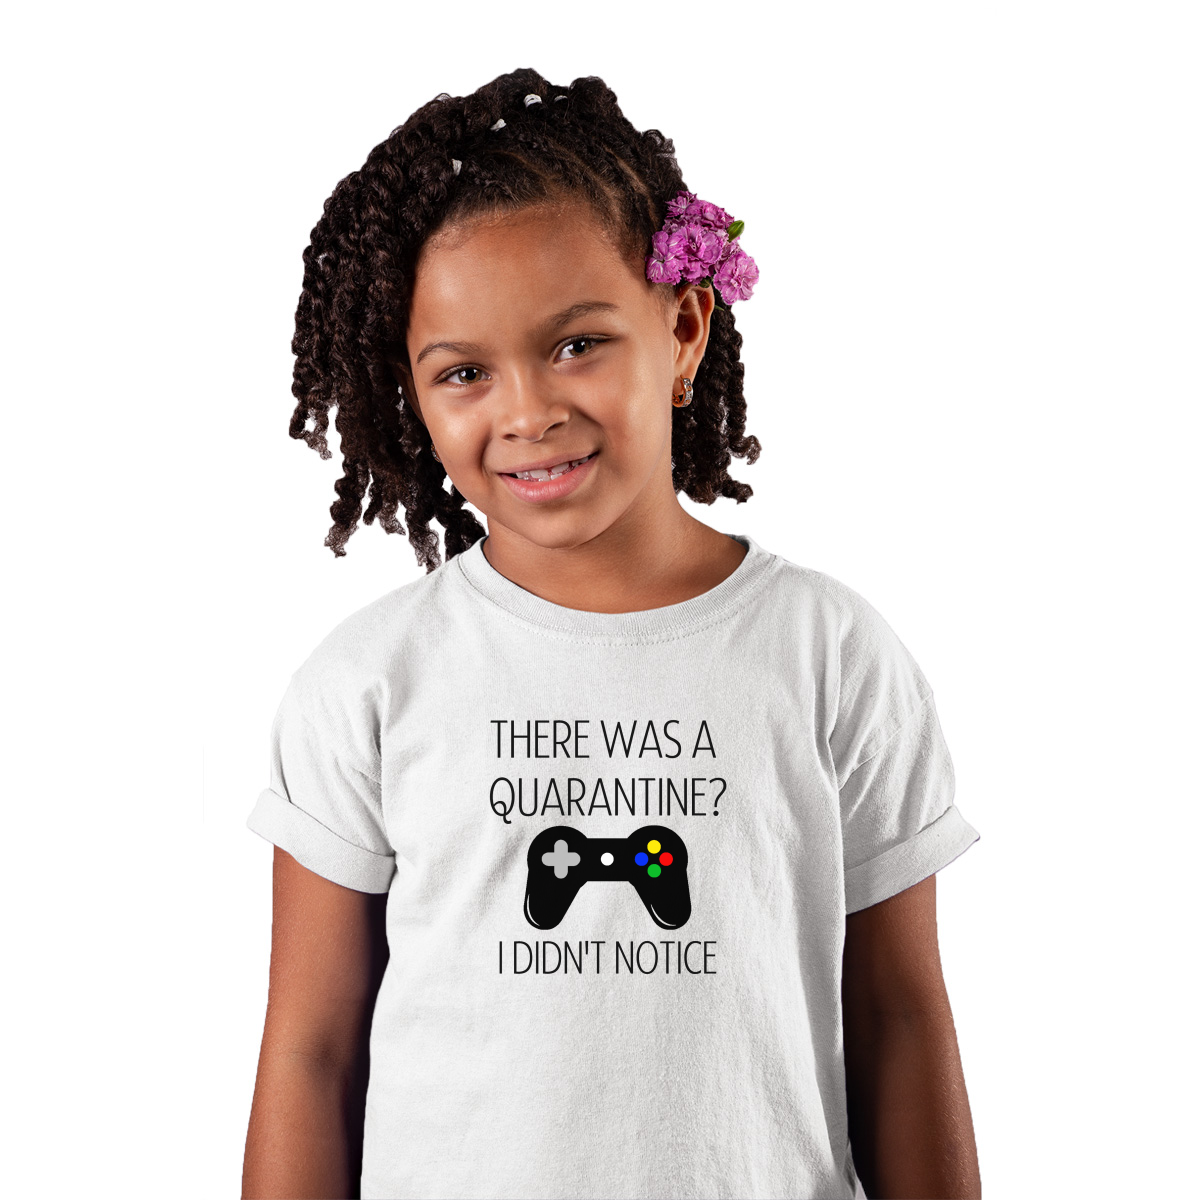 THERE WAS A QUARANTİNE Kids T-shirt | White